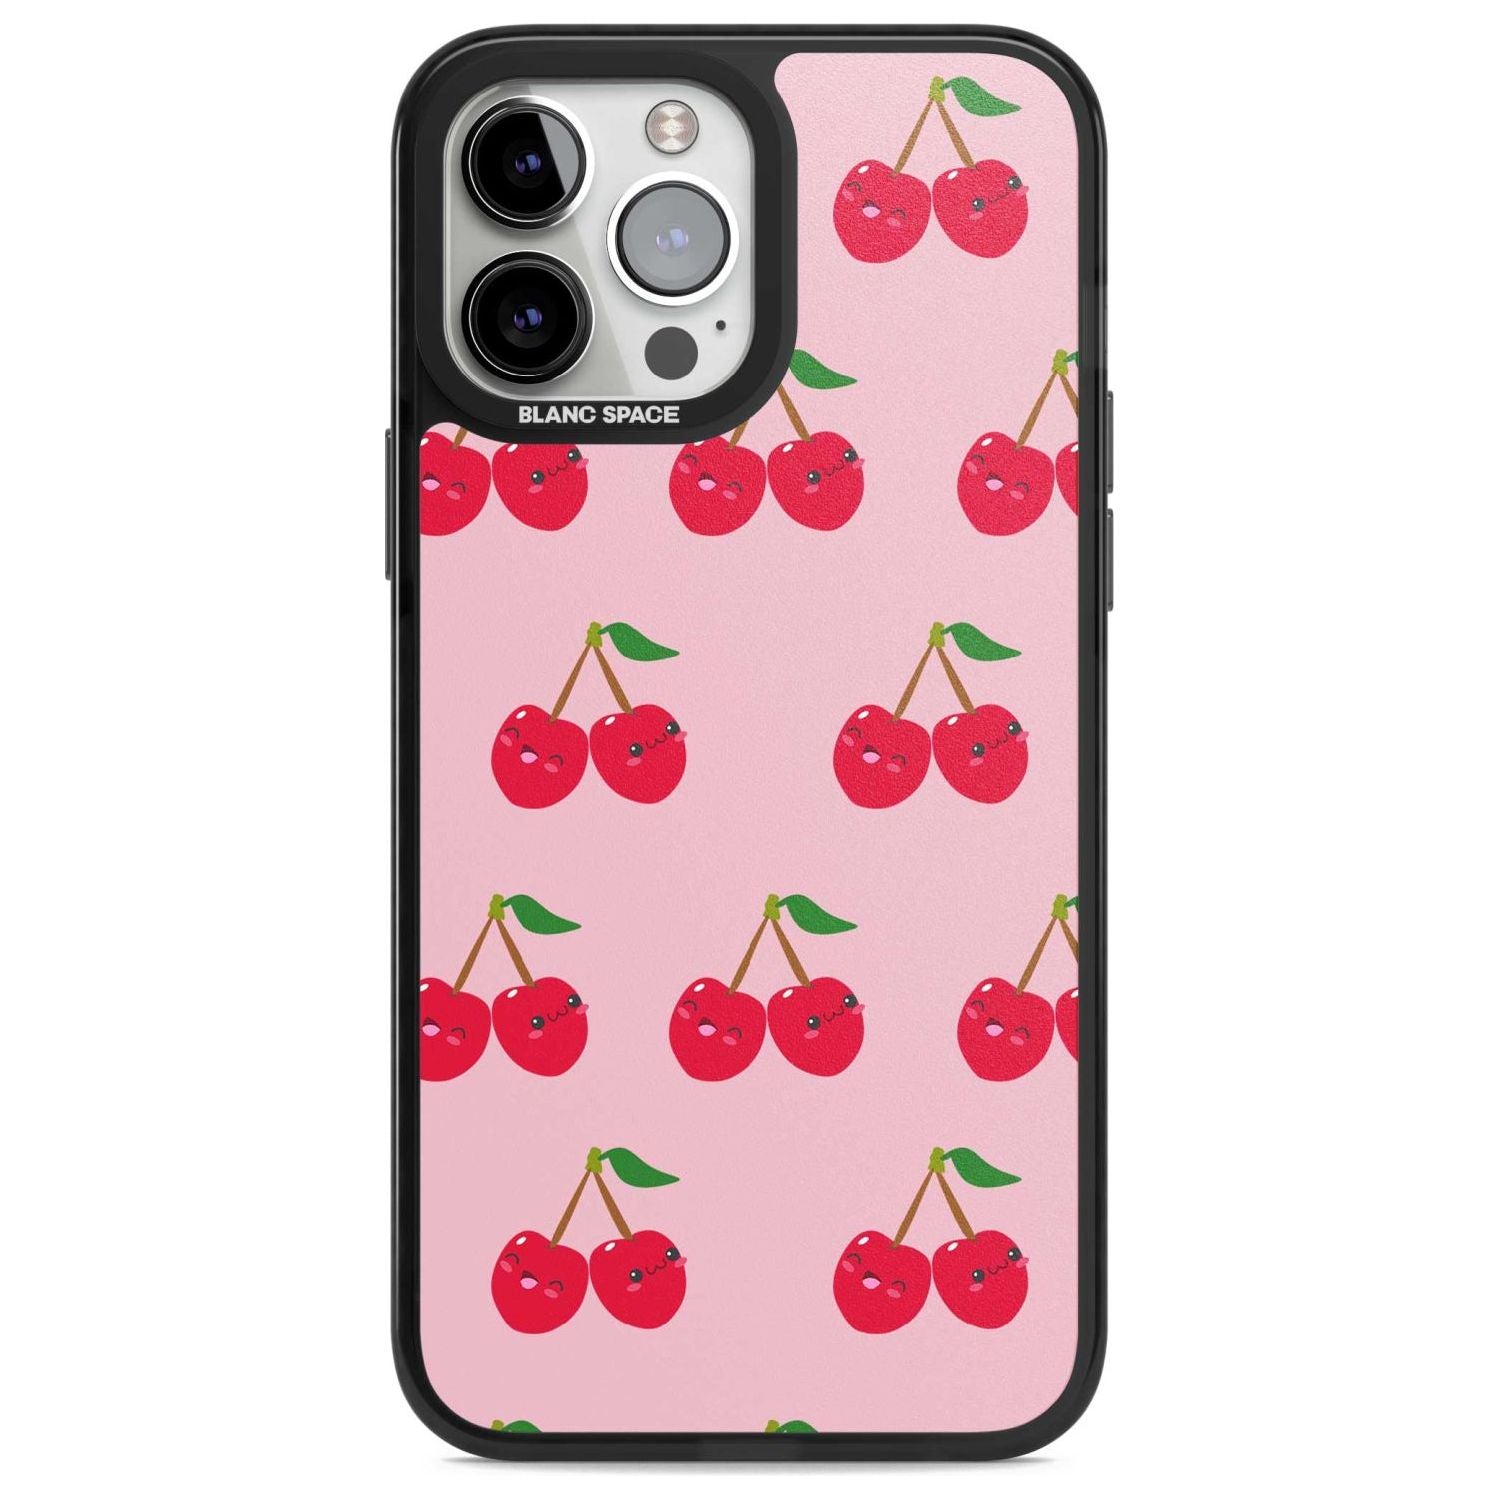 Cheeky Cherry Phone Case iPhone 13 Pro Max / Magsafe Black Impact Case Blanc Space